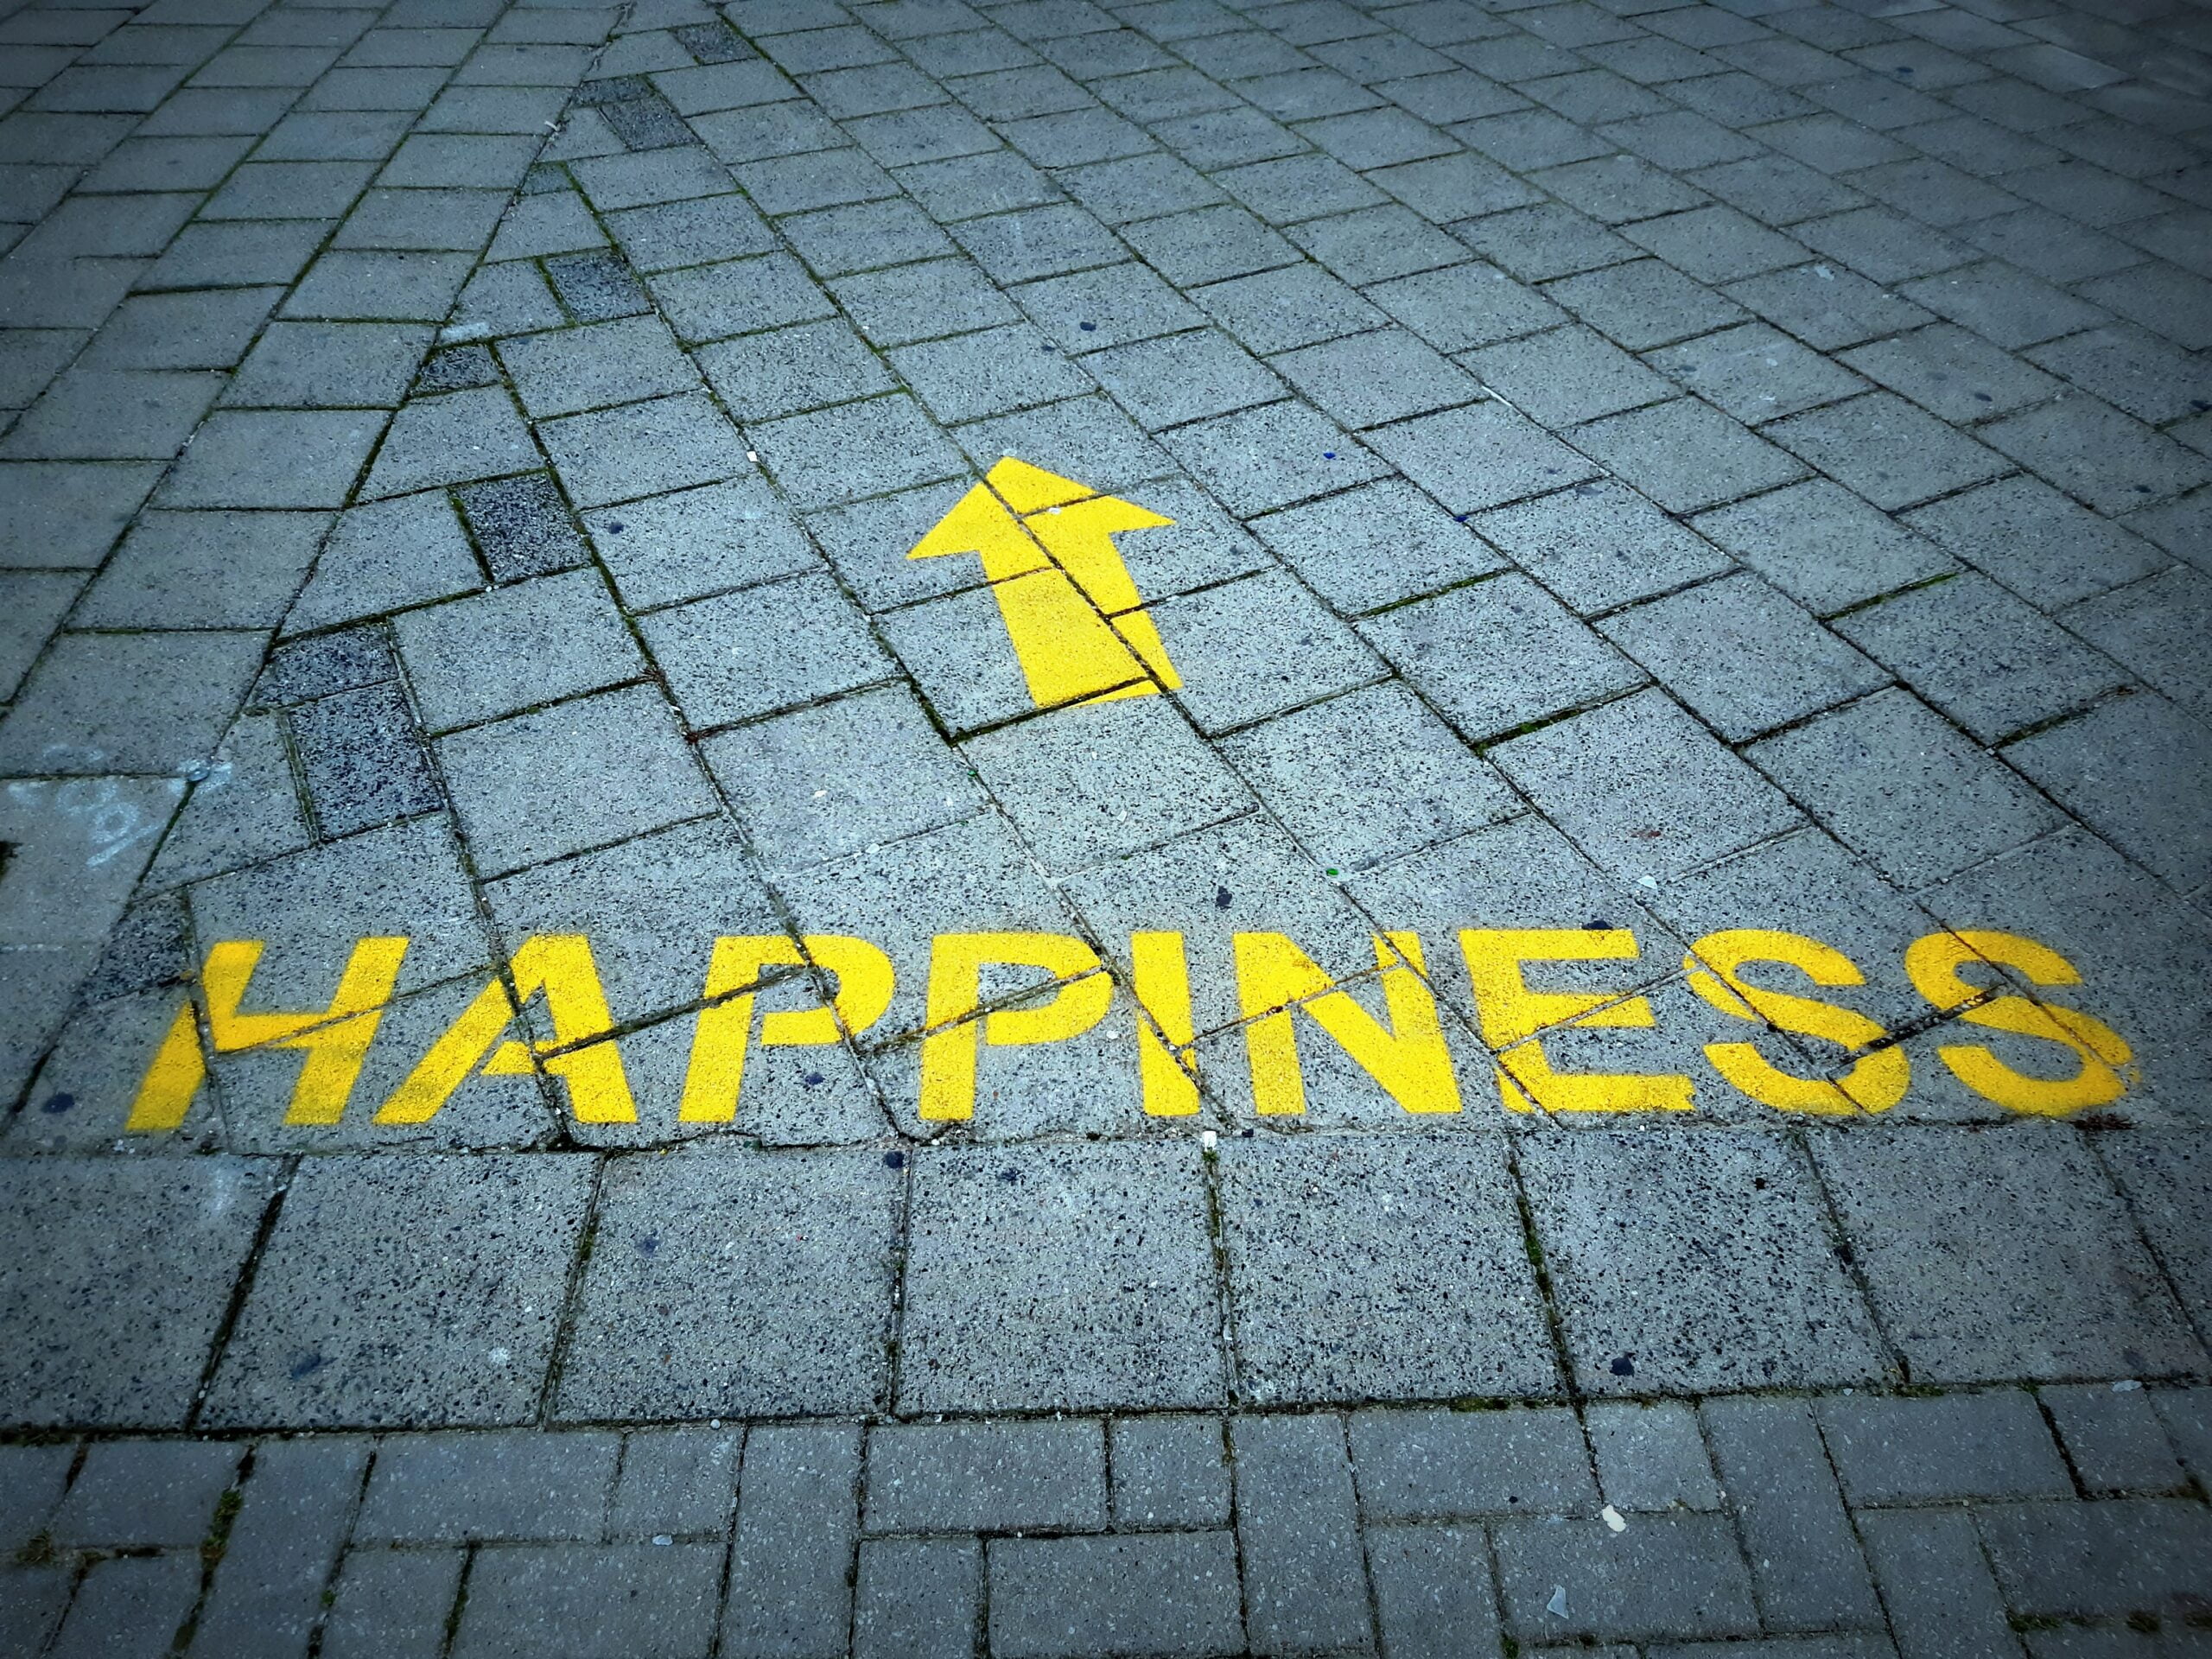 Footpath with arrow to happiness